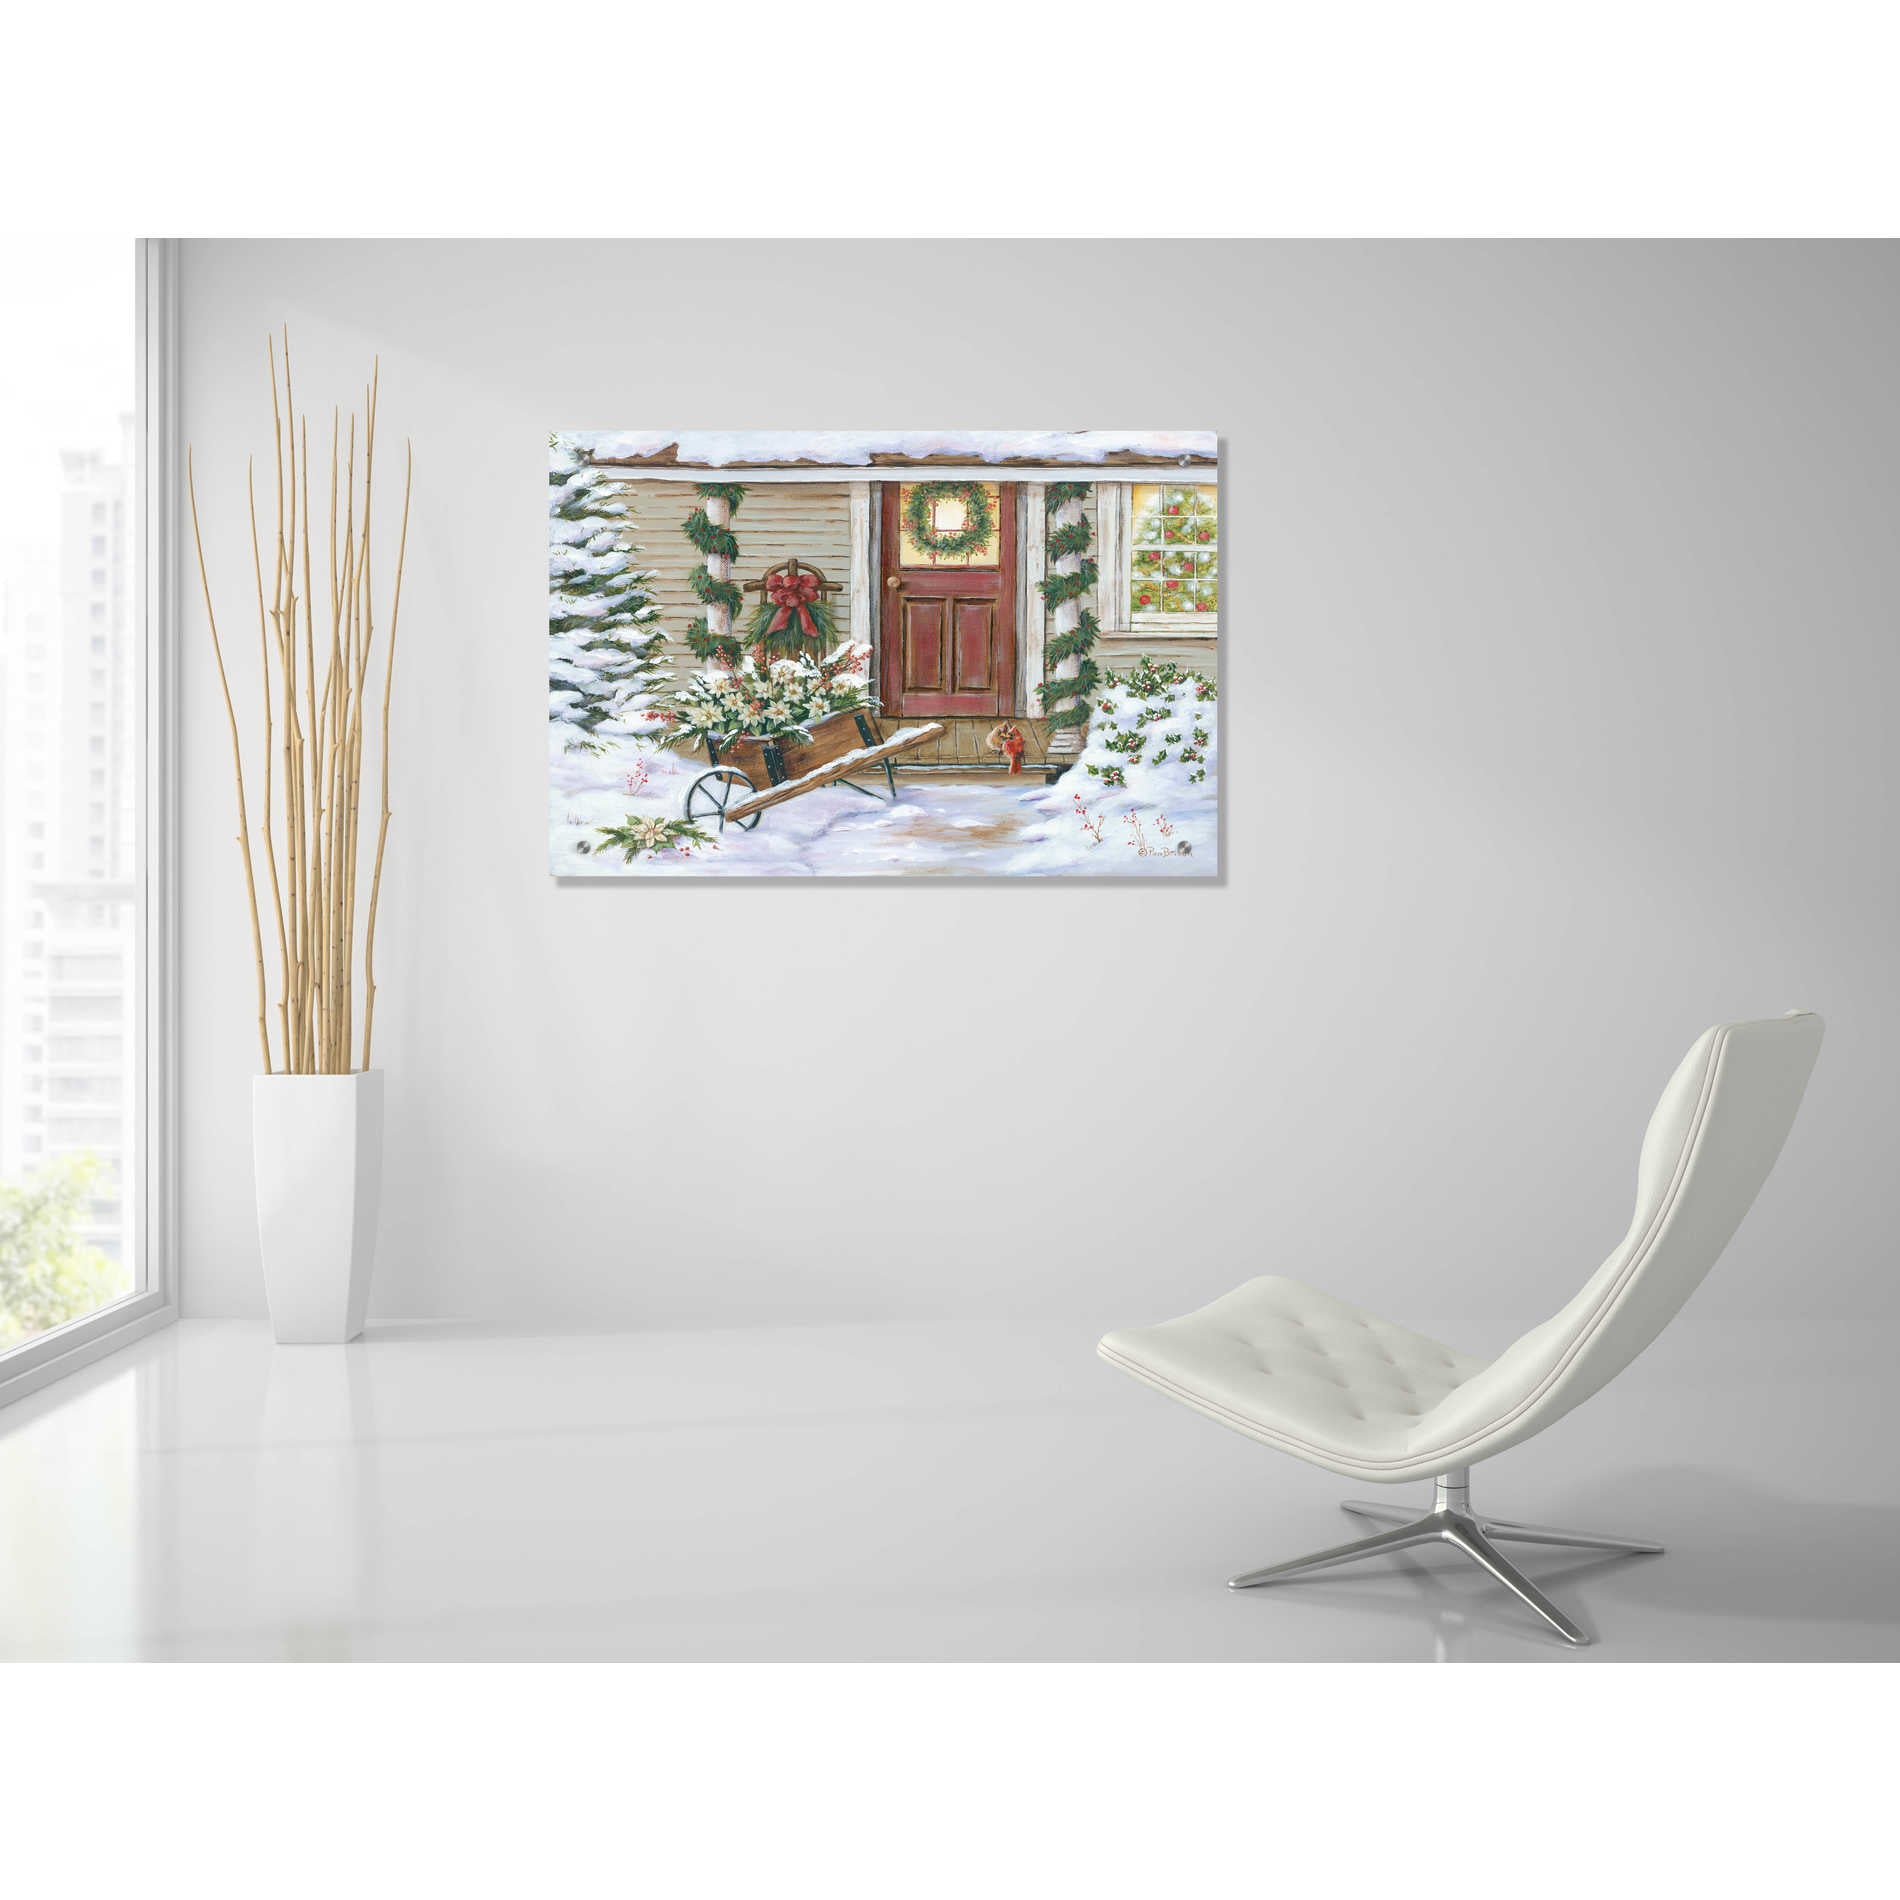 Epic Art 'Holiday Porch' by Pam Britton, Acrylic Glass Wall Art,36x24